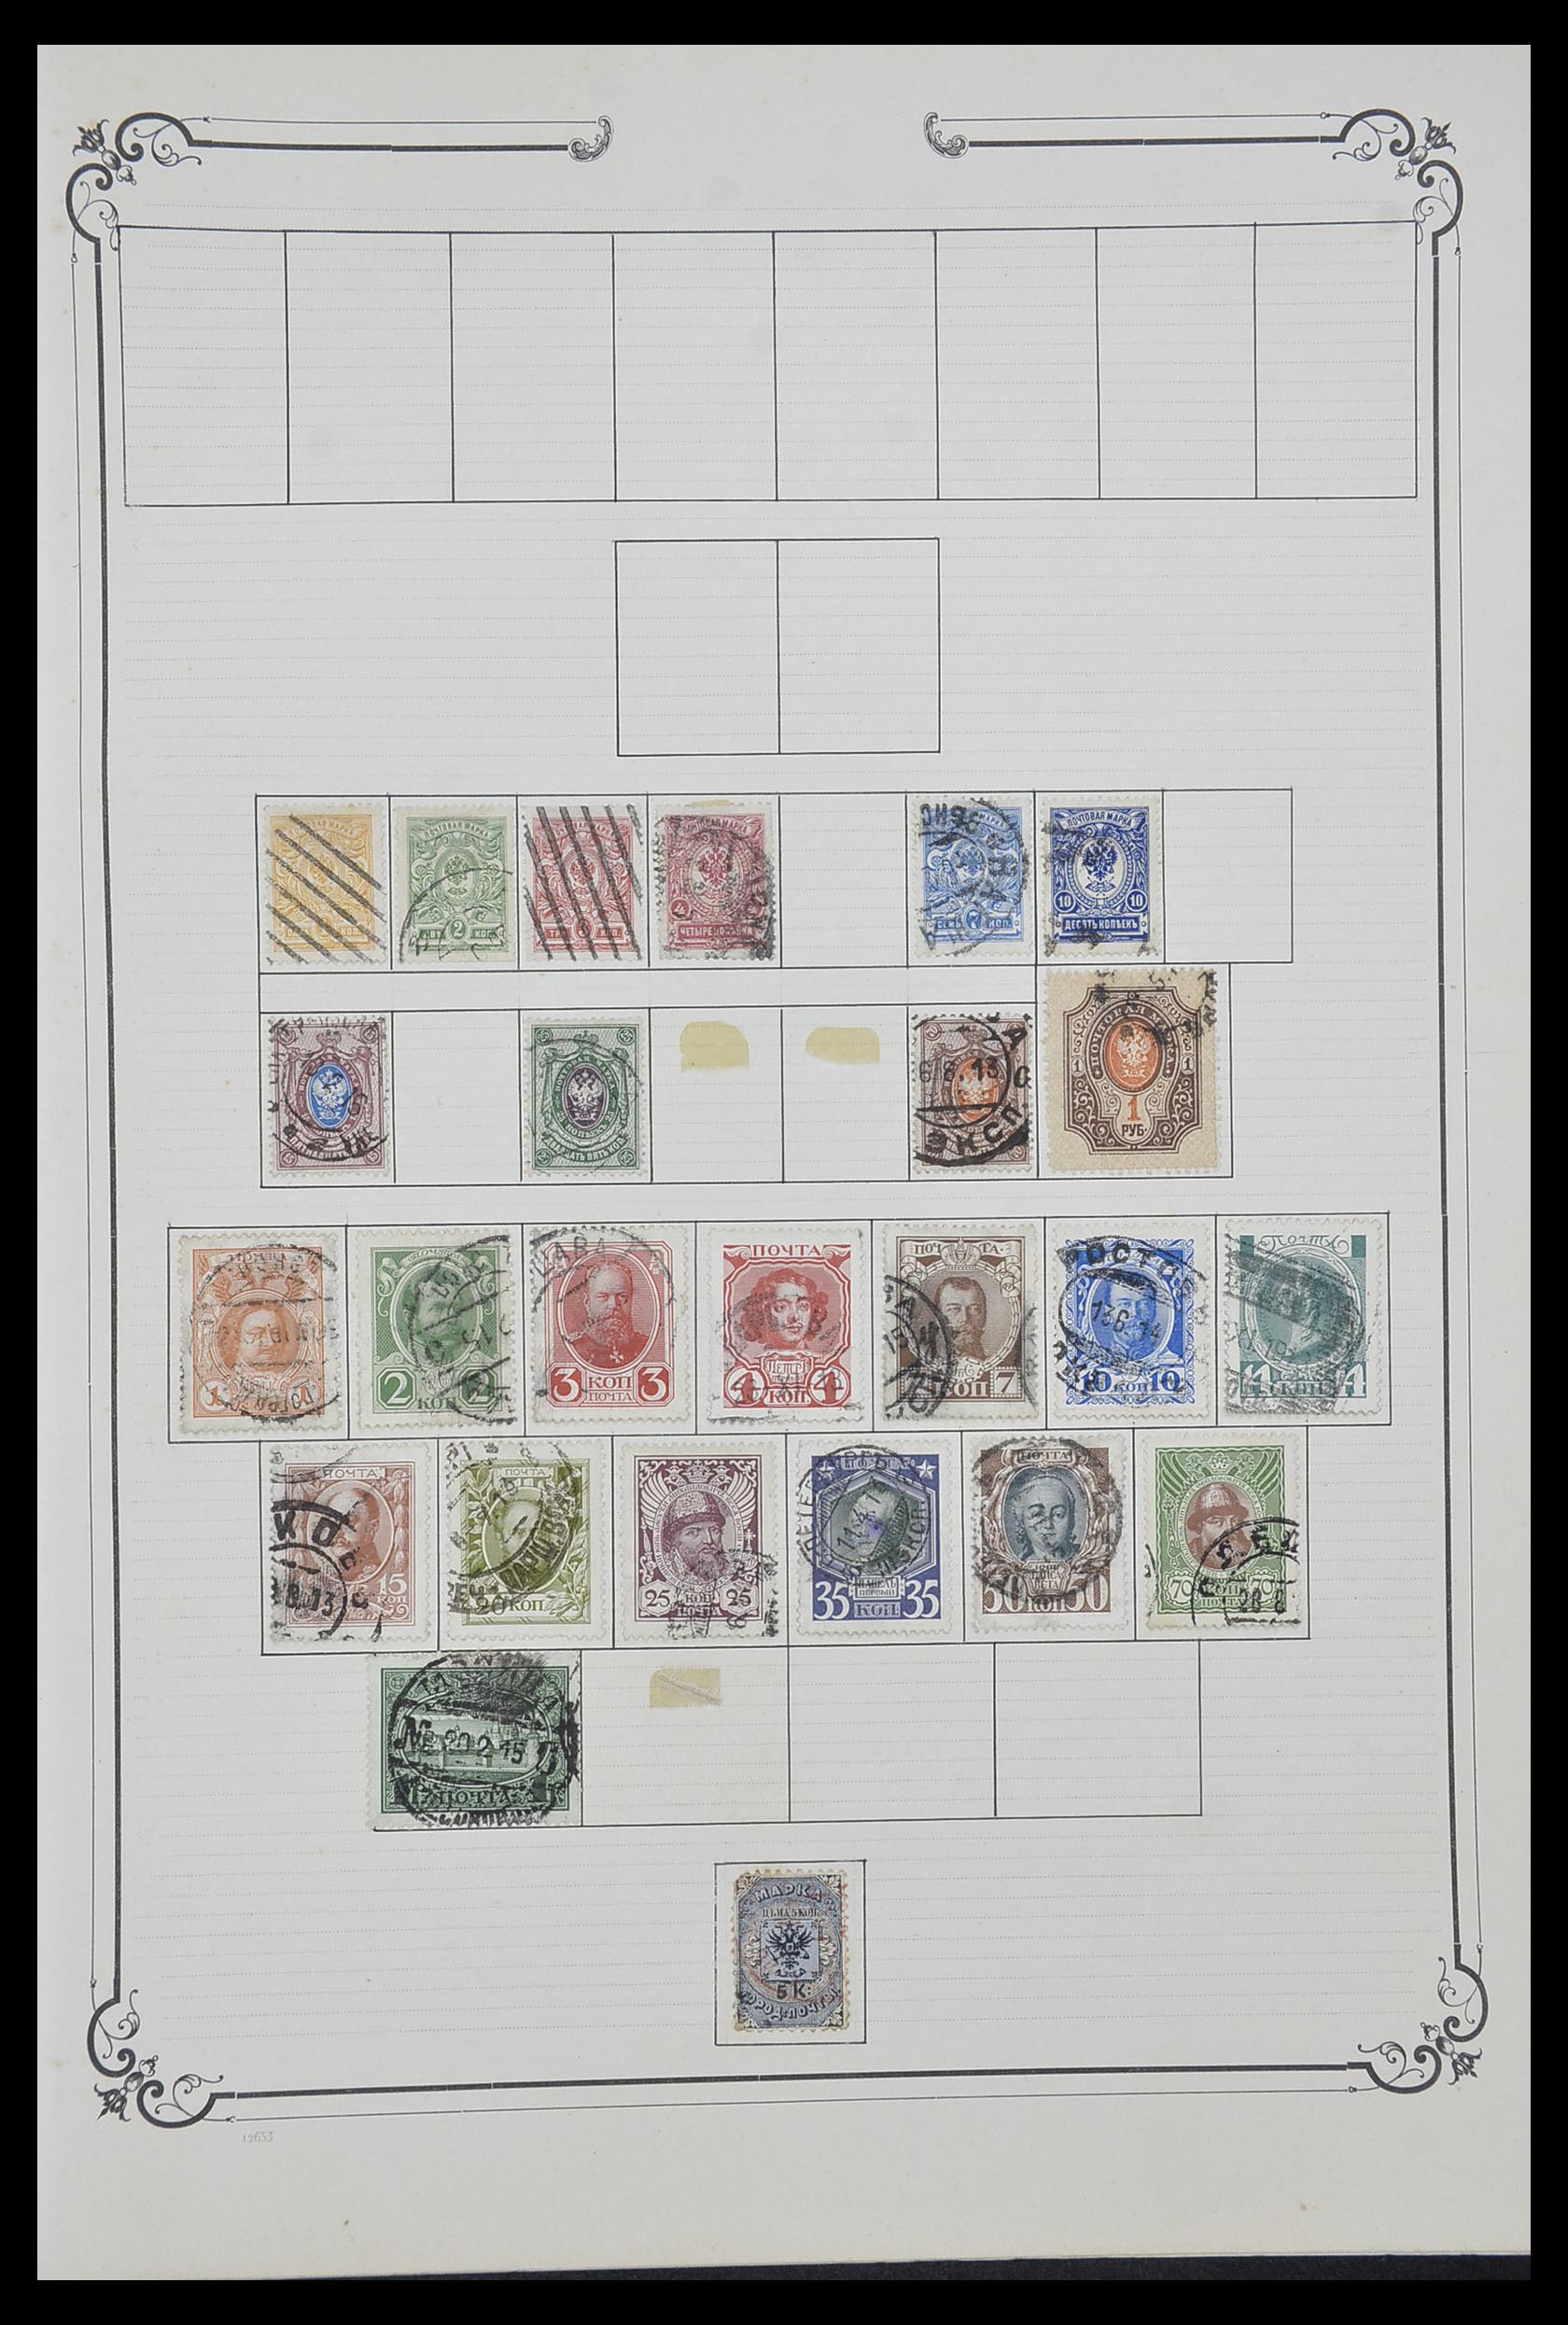 33991 034 - Stamp collection 33991 European countries 1851-ca. 1920.